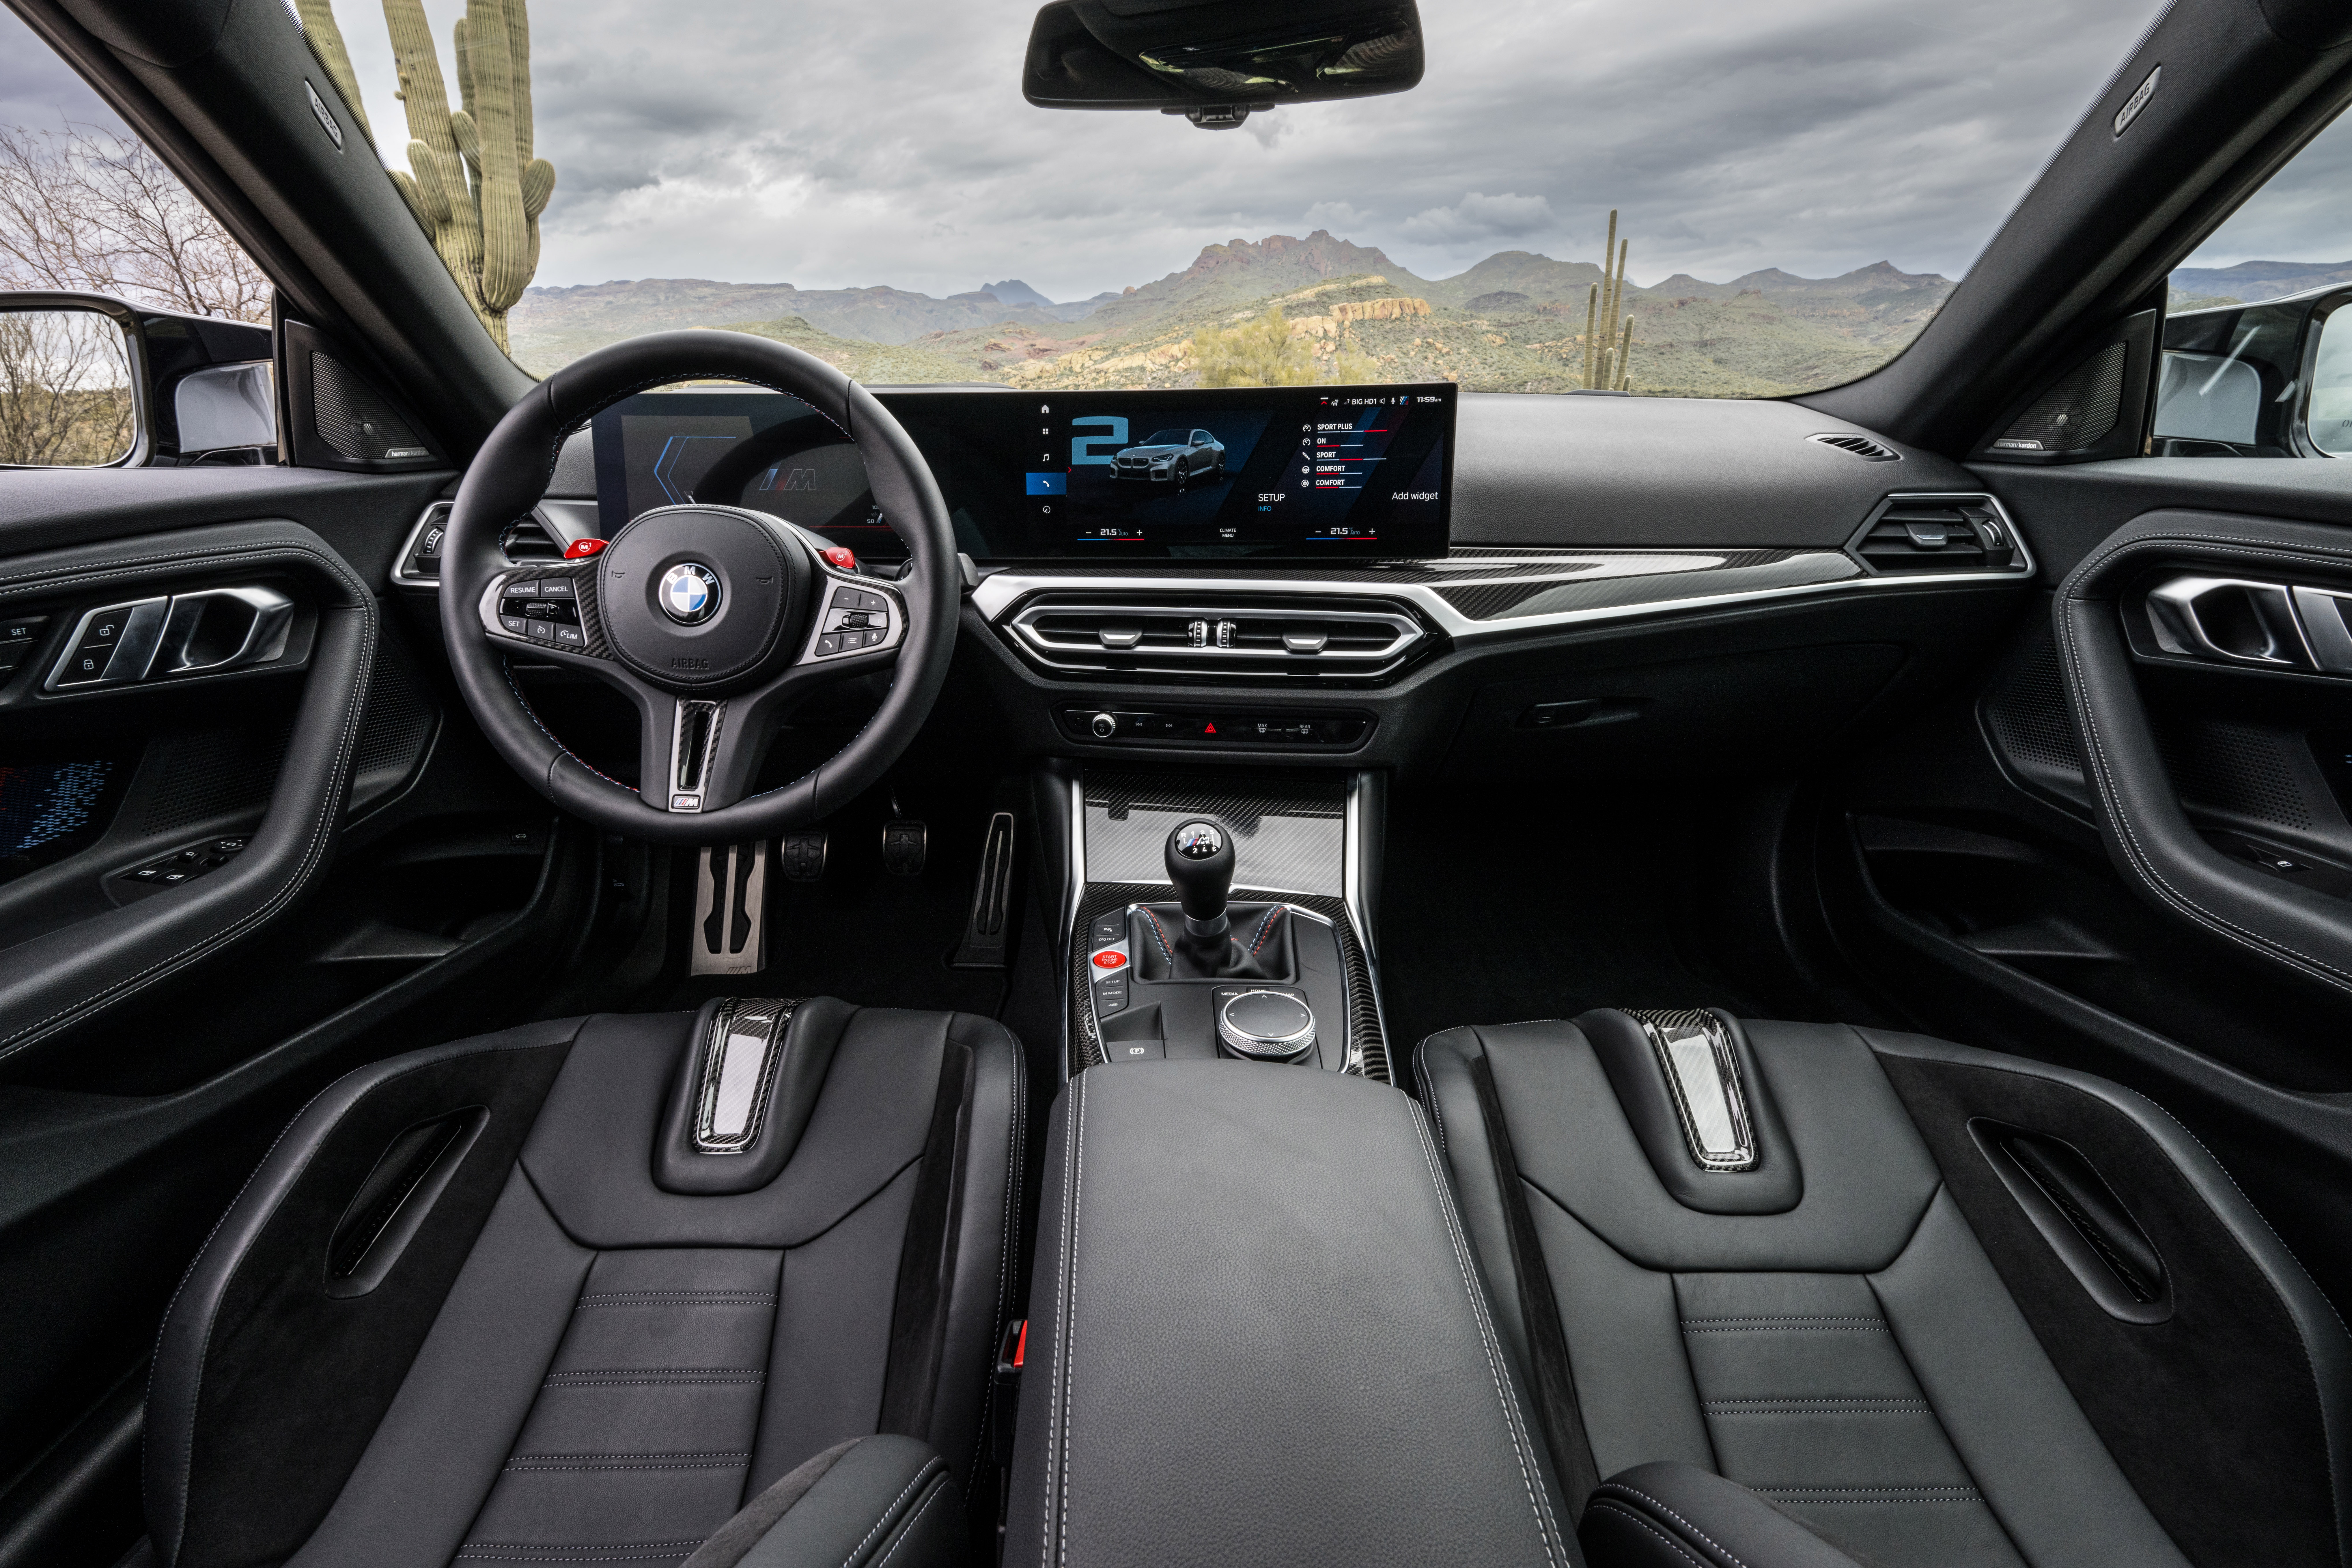 The 2023 BMW M2 front seating area and dash